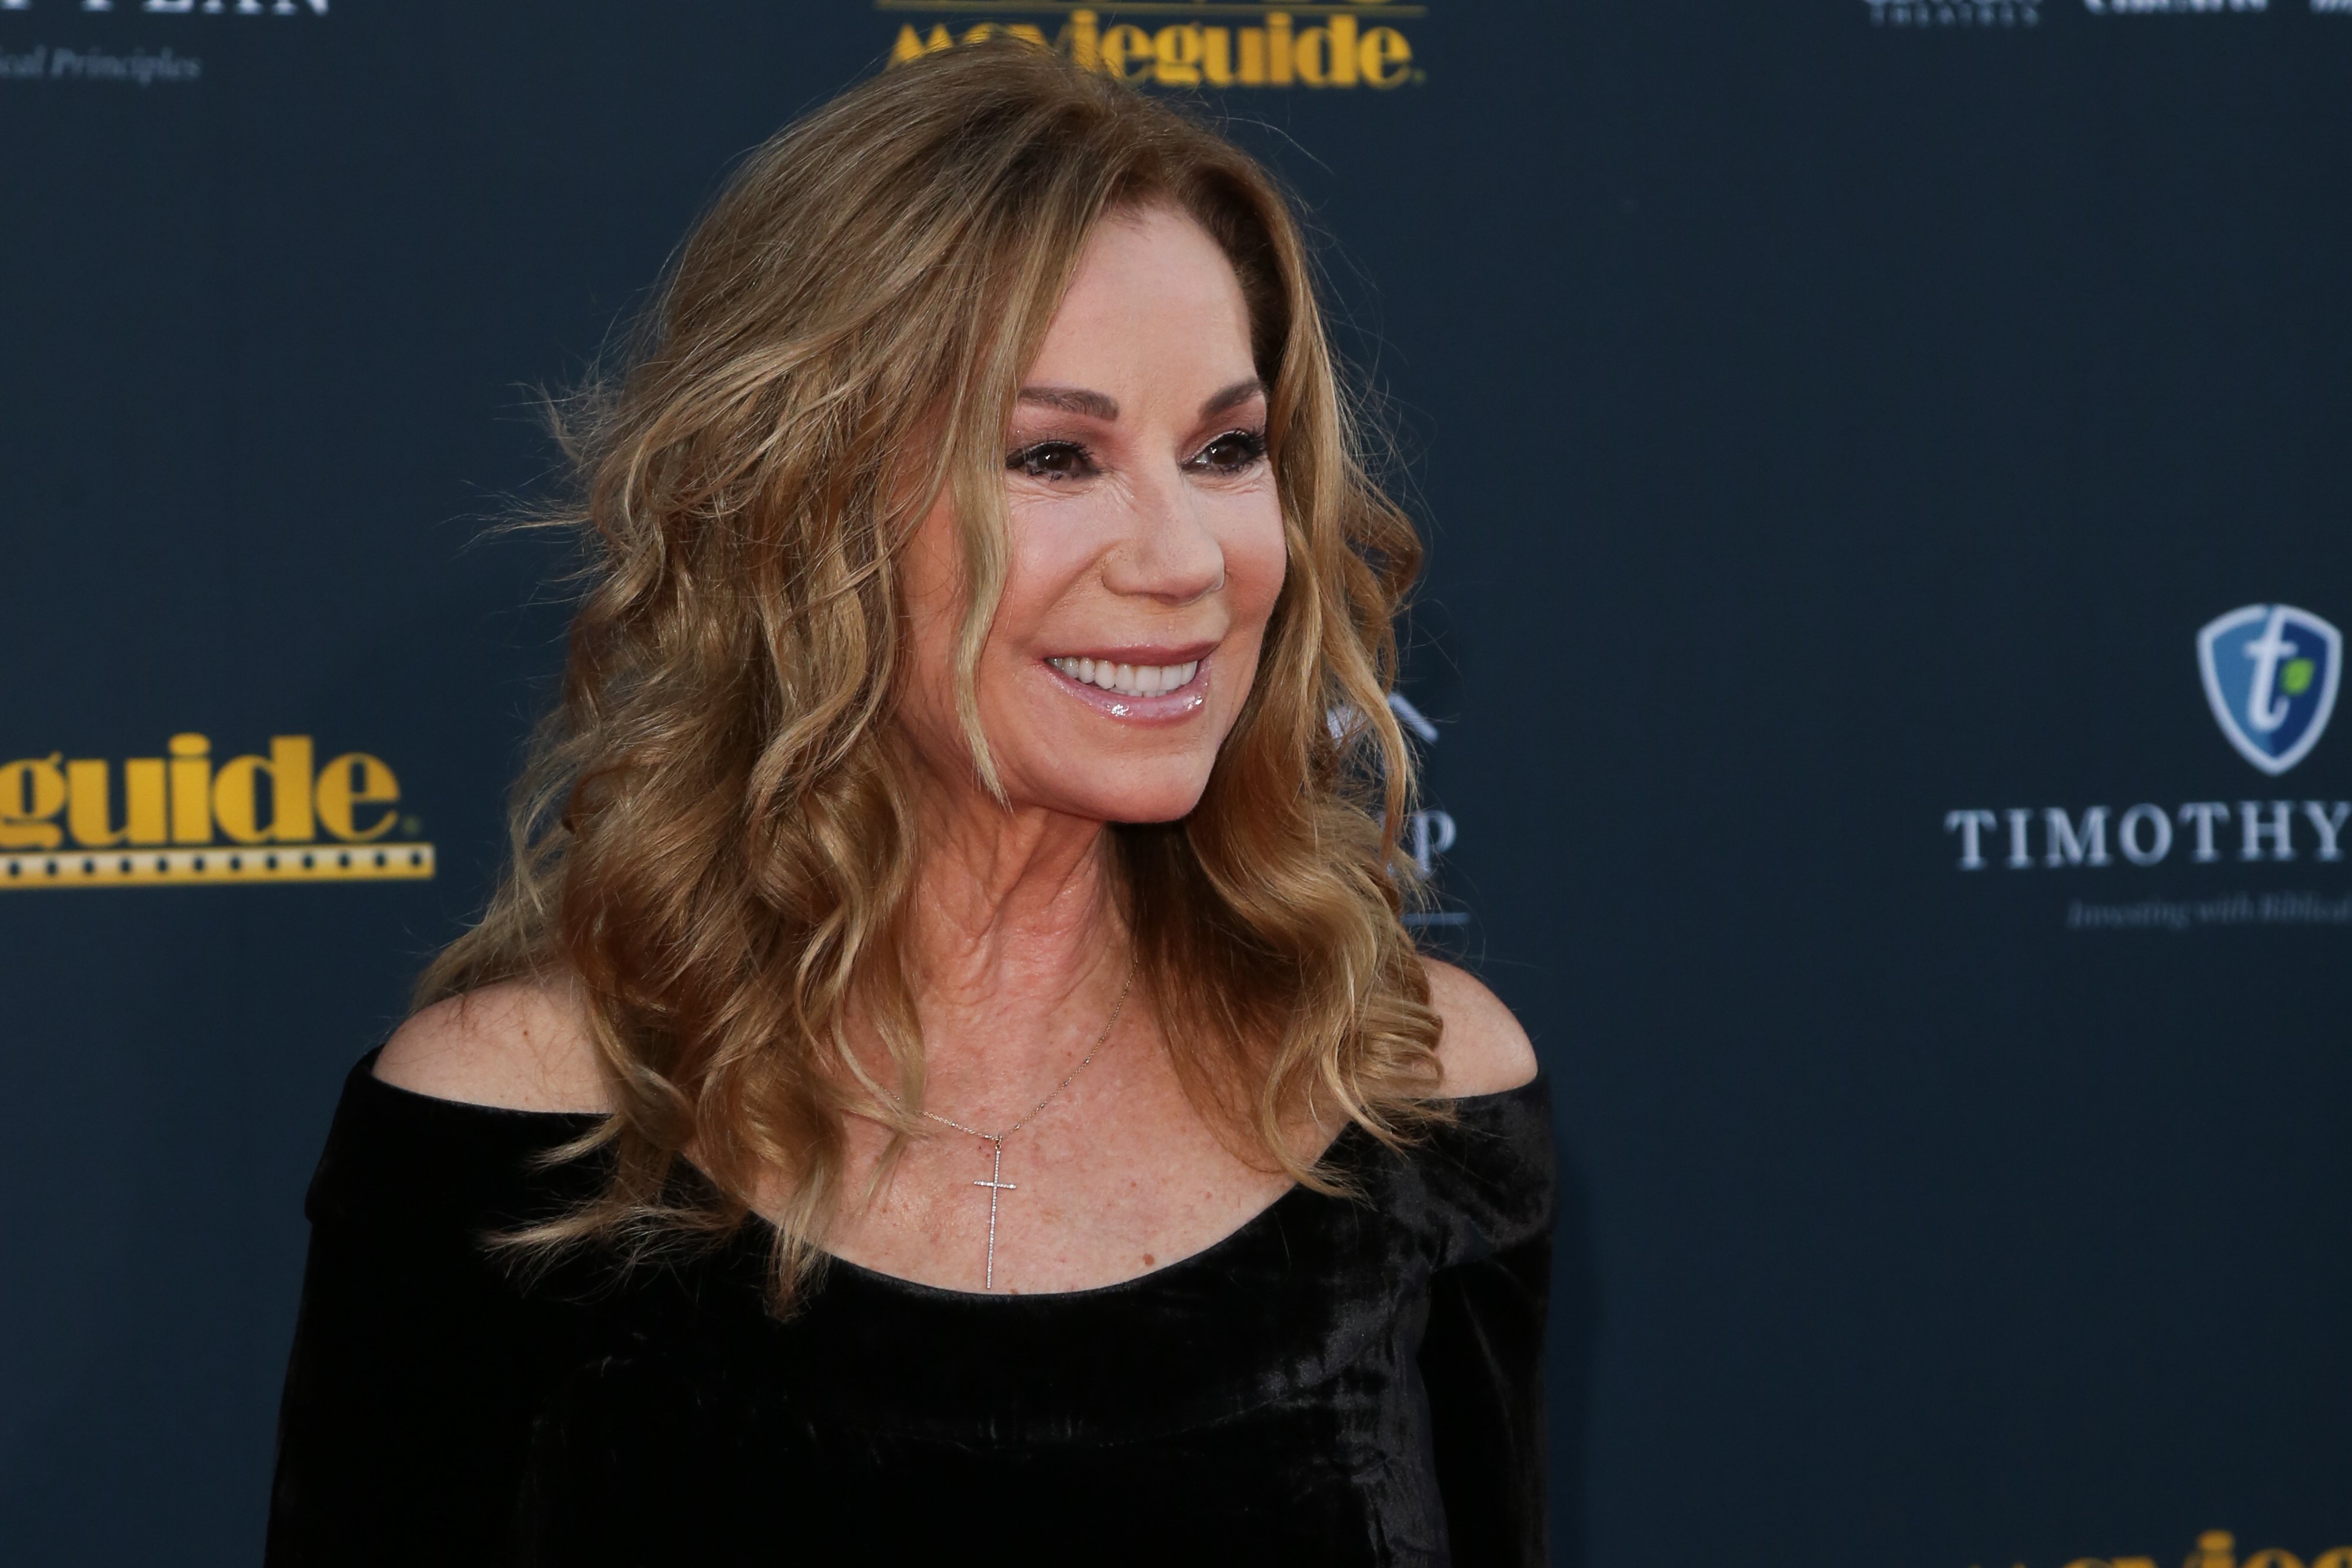 Kathie Lee Gifford attends the Movieguide Awards Gala in Los Angeles, California on January 24, 2020 | Photo: Getty Images